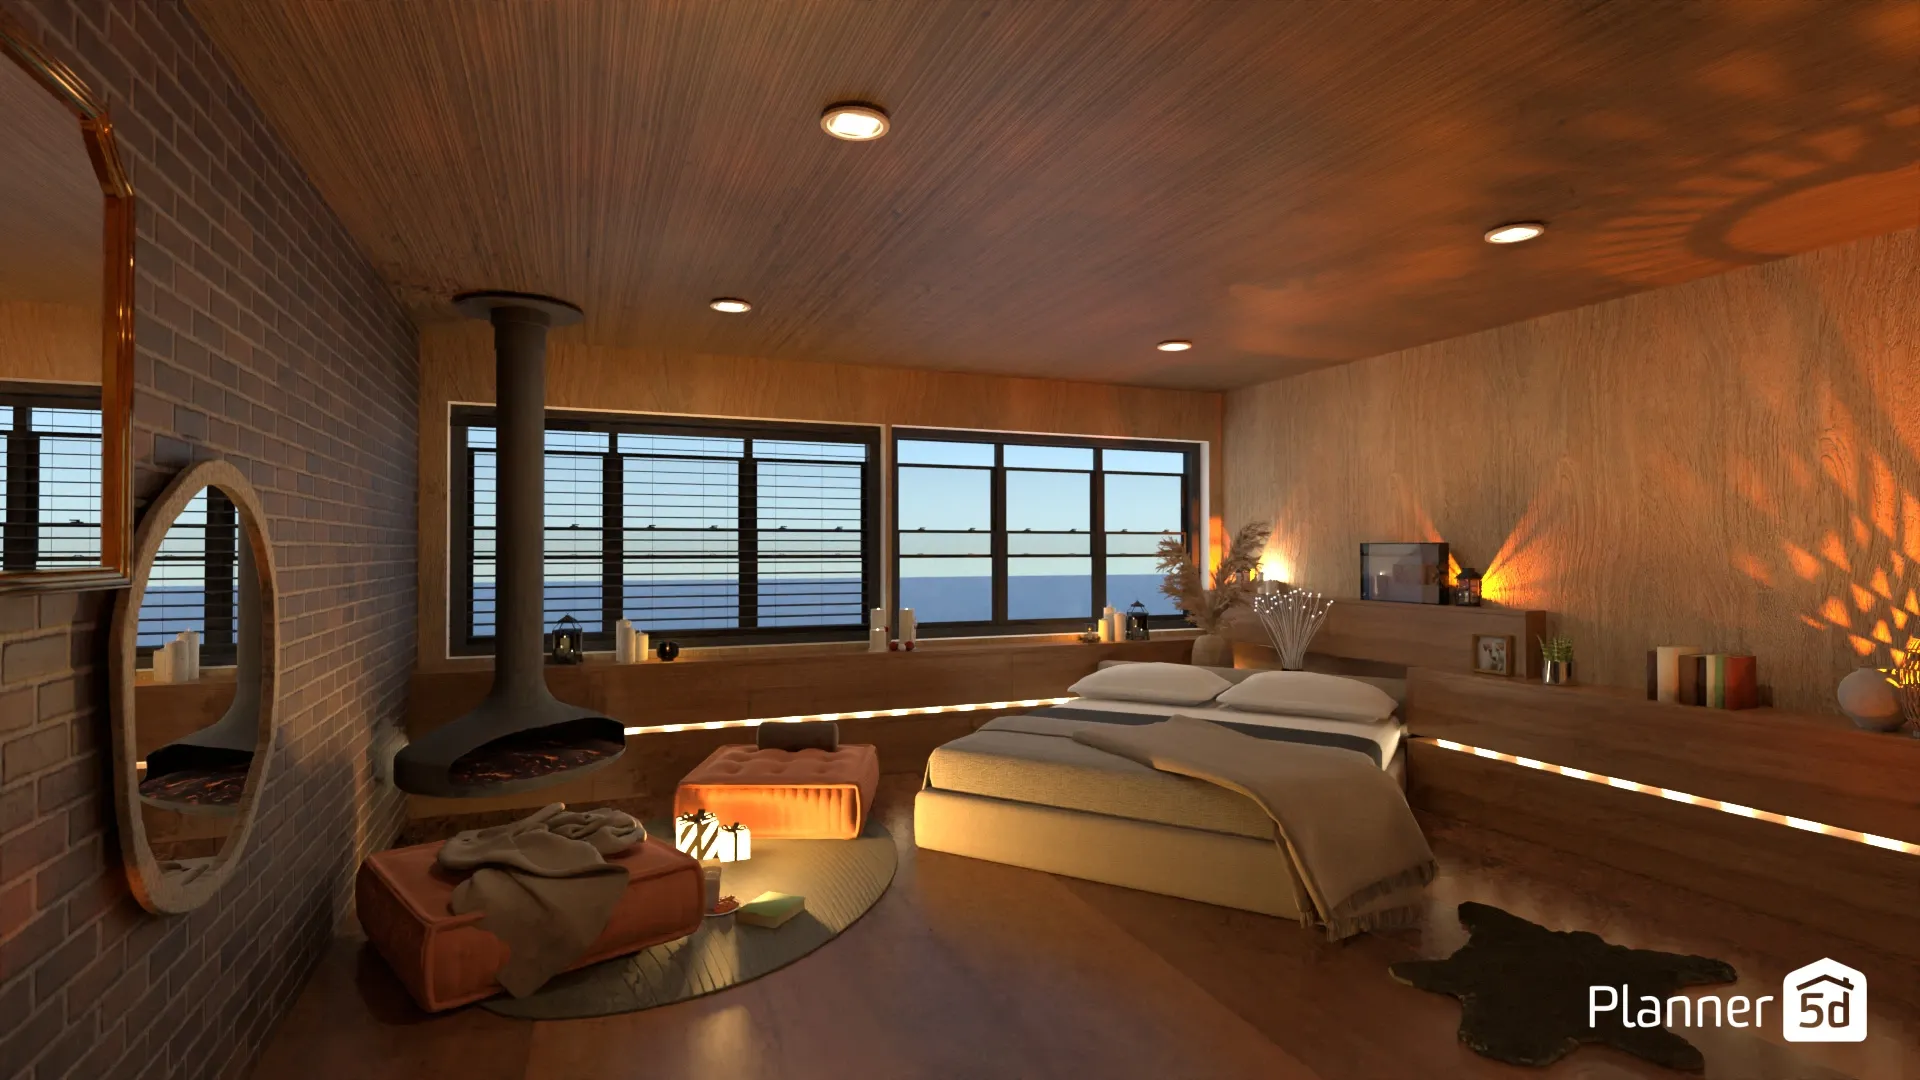 planner5d floor plan of an atmospheric bedroom with a view and lamps